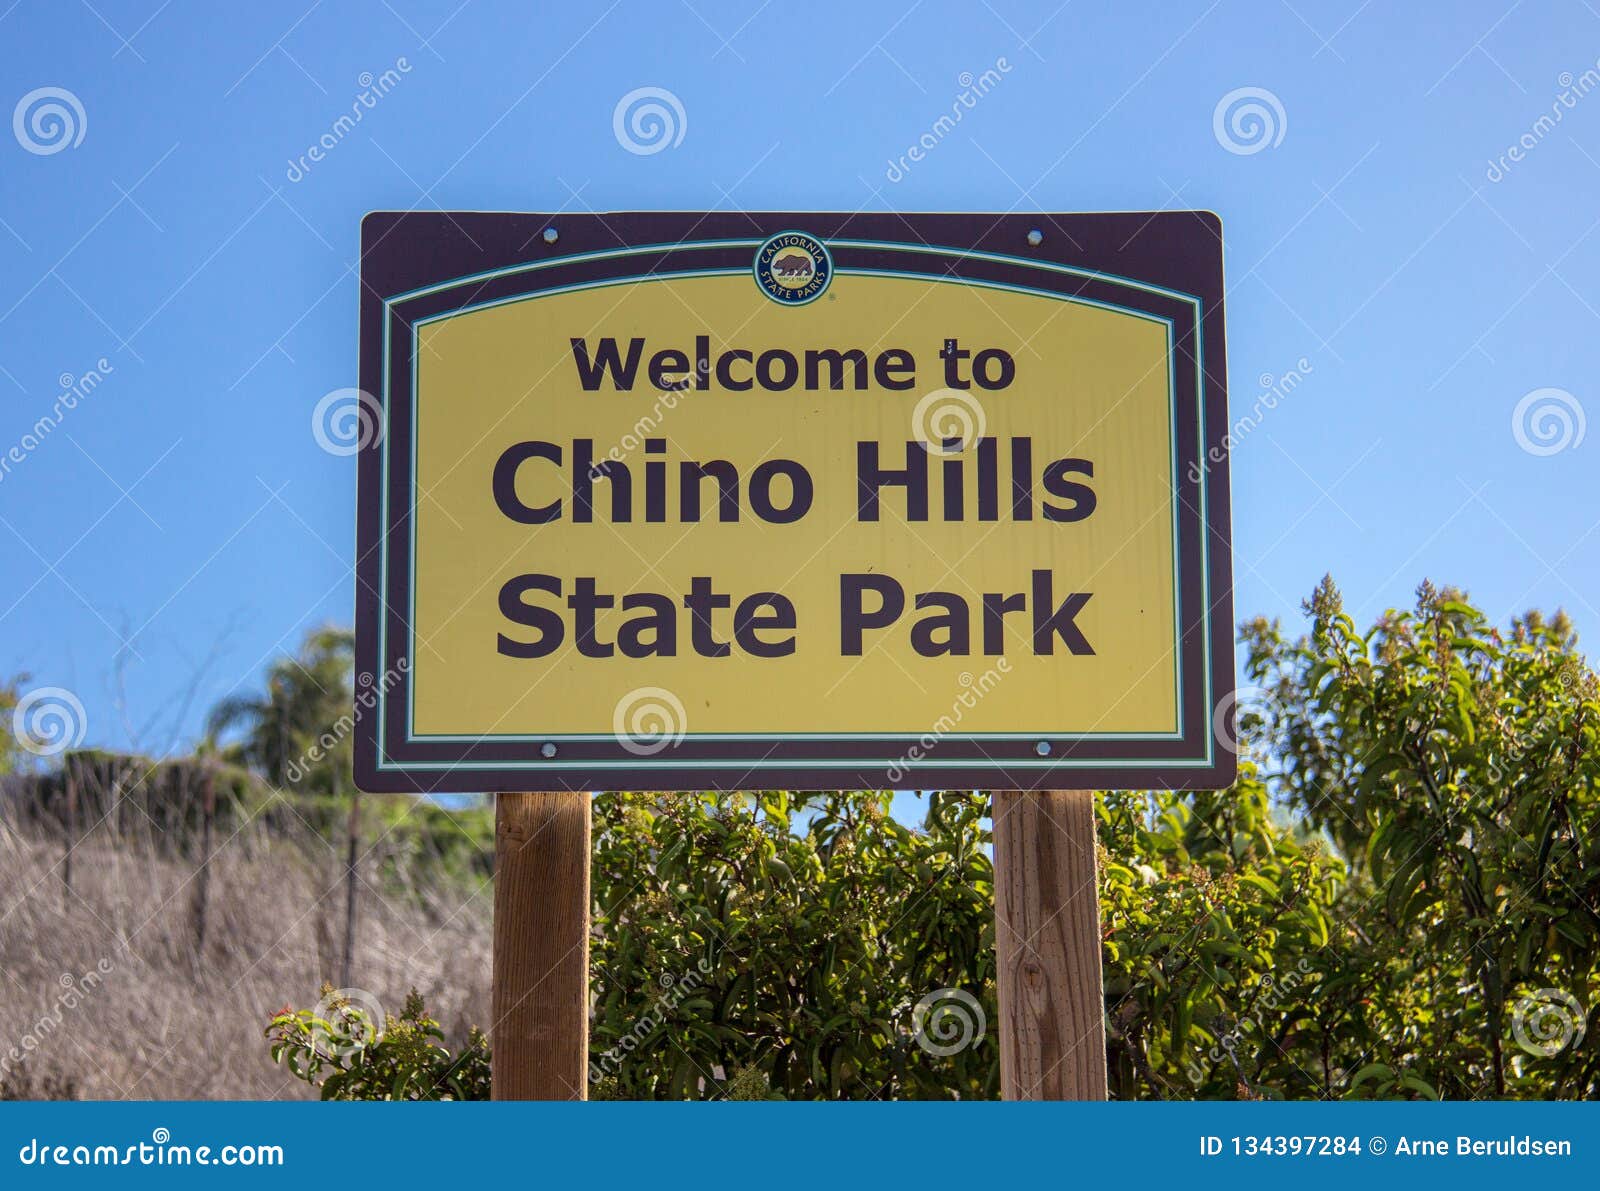 entrance to chino hills state park